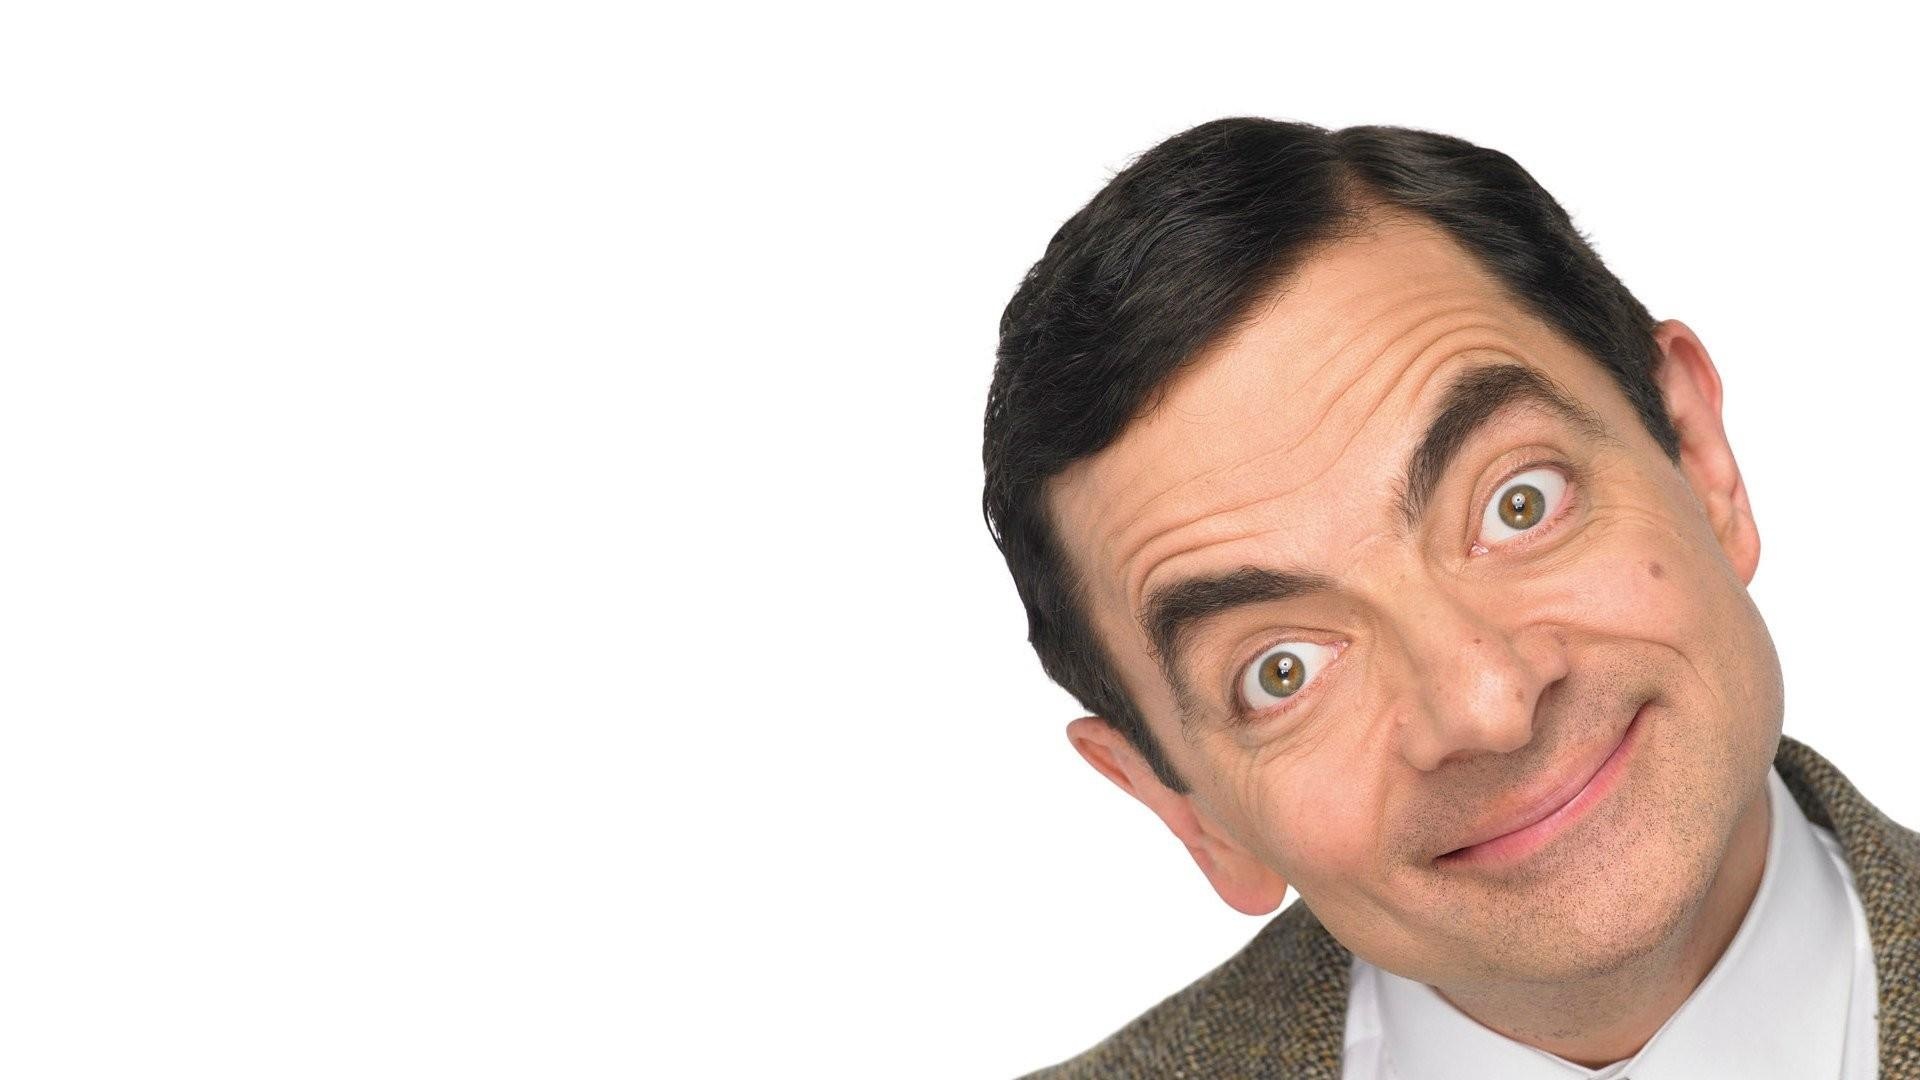 Rowan Atkinson: Mr Bean, Played the role of Emile Mondavarious in 2002 film Scooby-Doo. 1920x1080 Full HD Background.